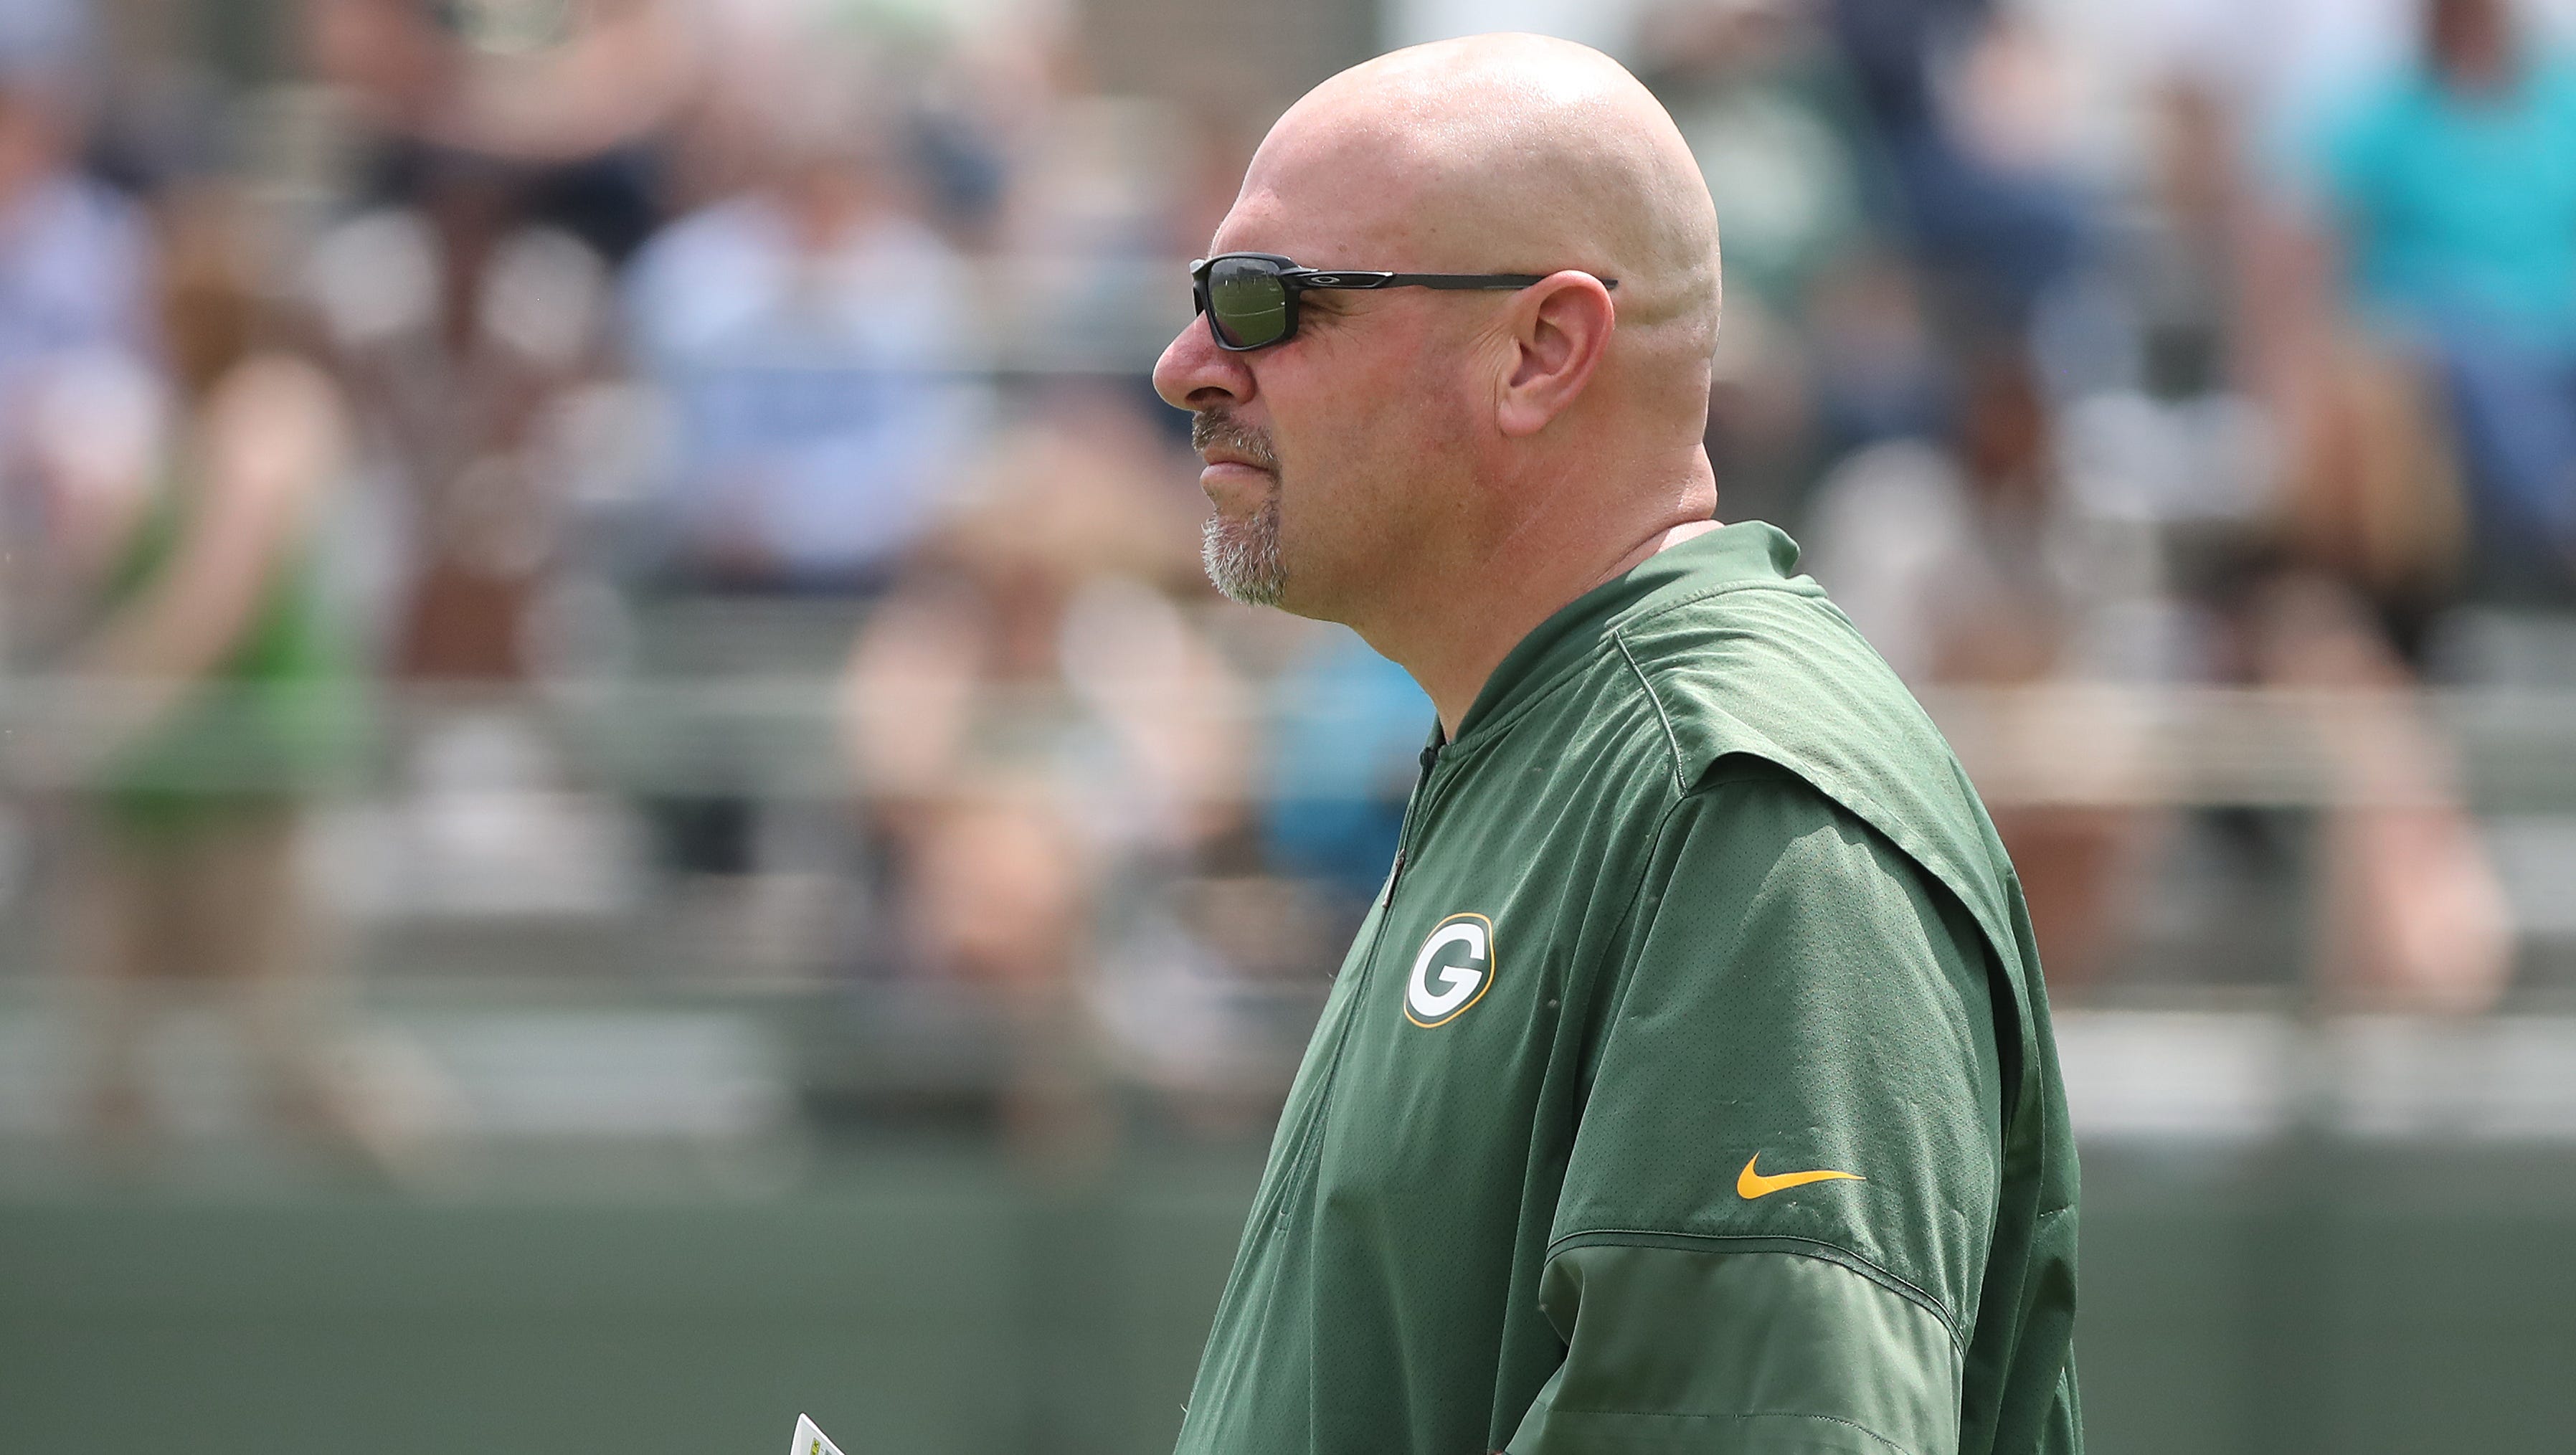 Packers defensive coordinator Mike Pettine during Green Bay Packers minicamp at Ray Nitschke Field Tuesday, June 12, 2018 in Ashwaubenon, Wis.